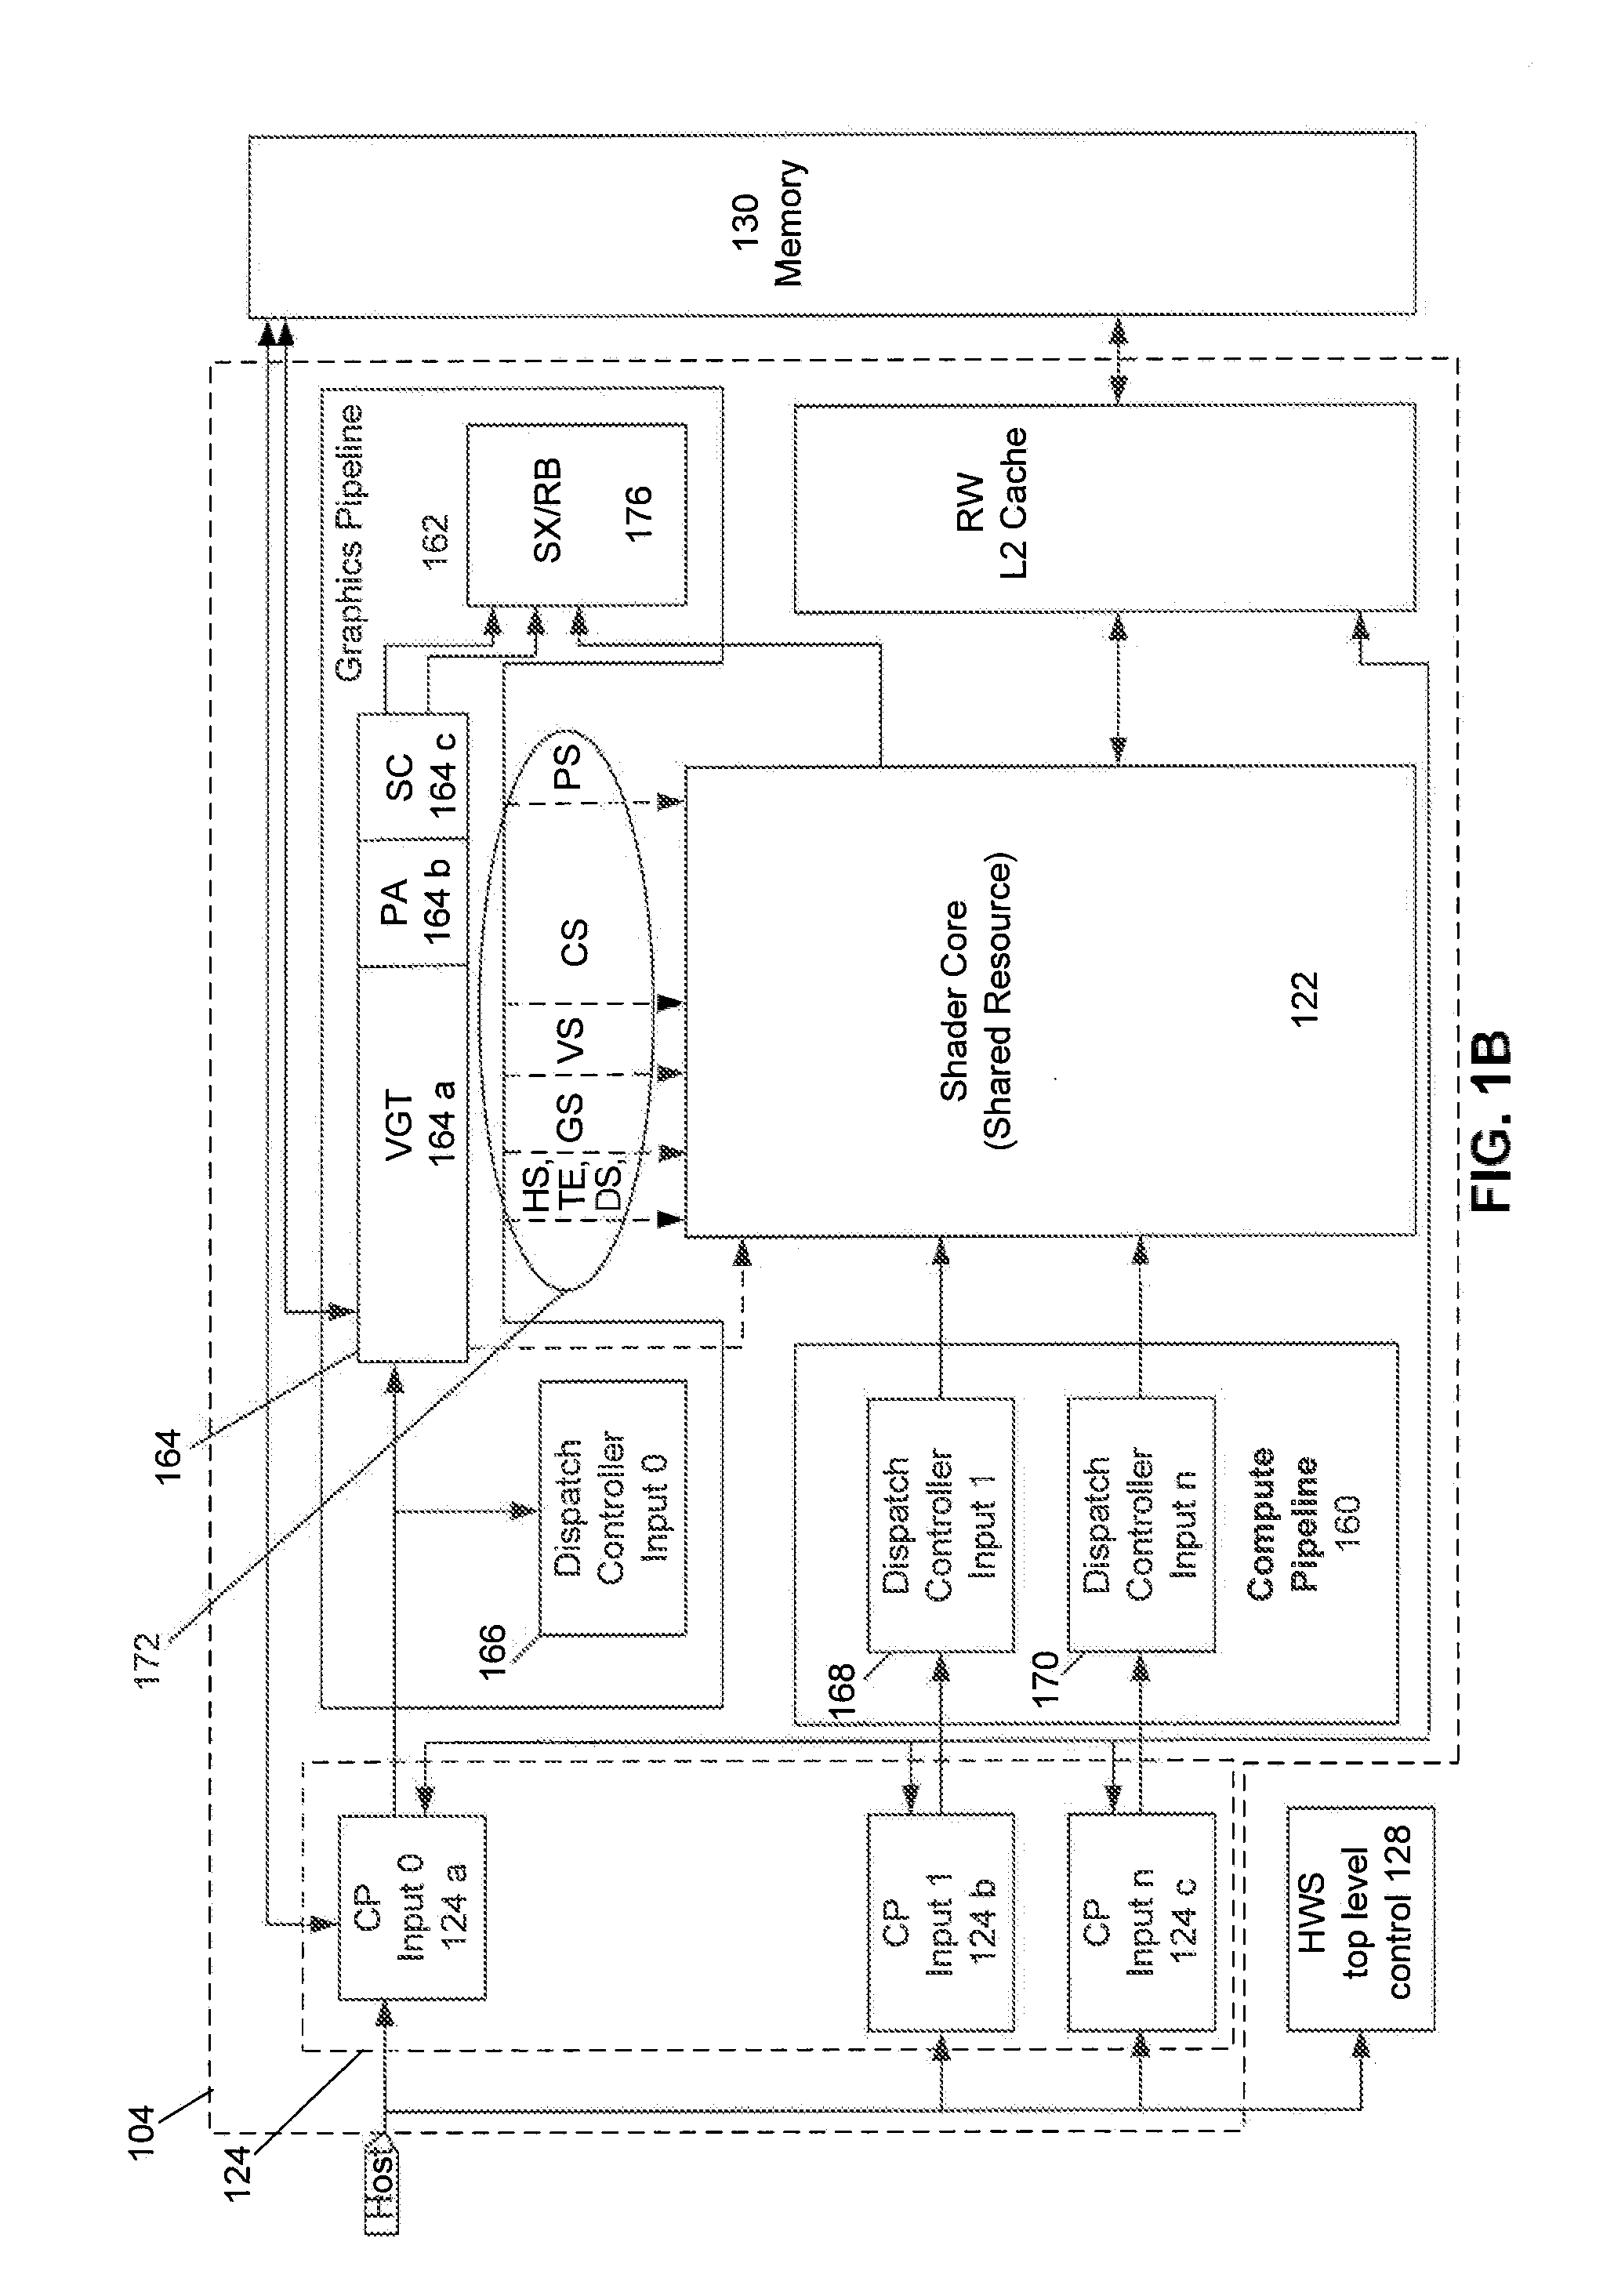 Device Discovery and Topology Reporting in a Combined CPU/GPU Architecture System